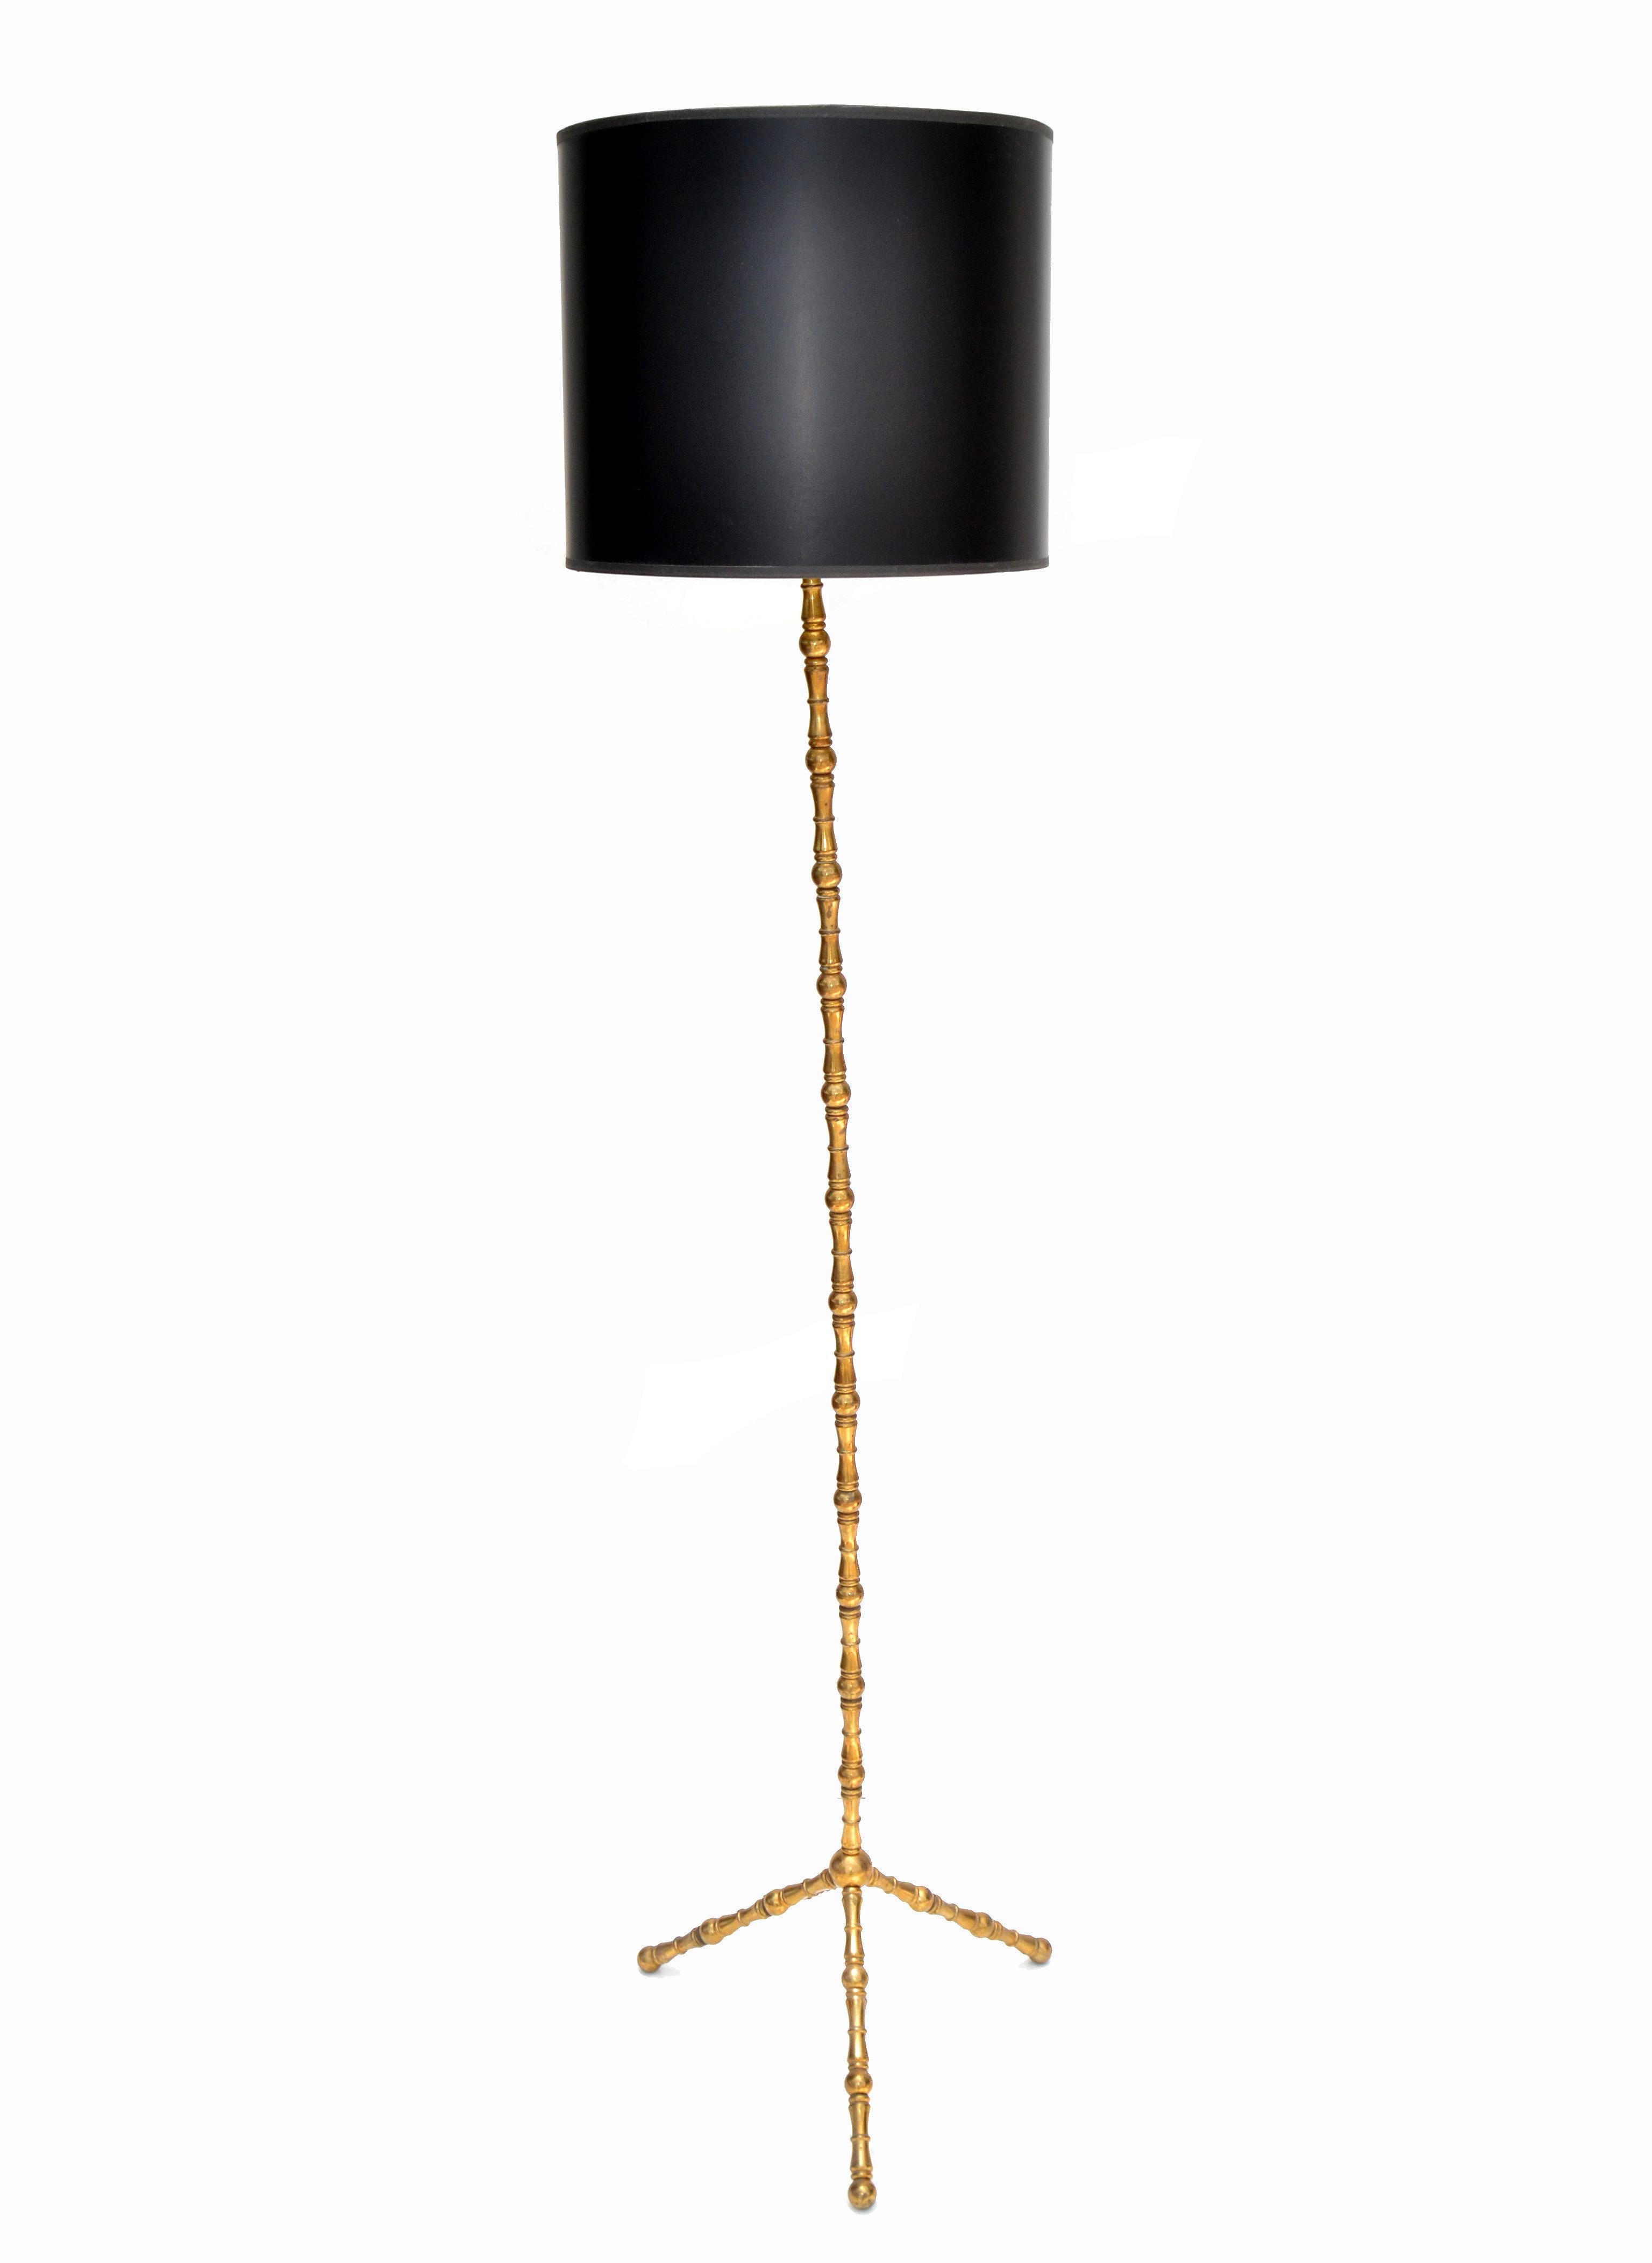 French Neoclassical Bronze and Brass Maison Baguès Floor Lamp, 1950 For Sale 4